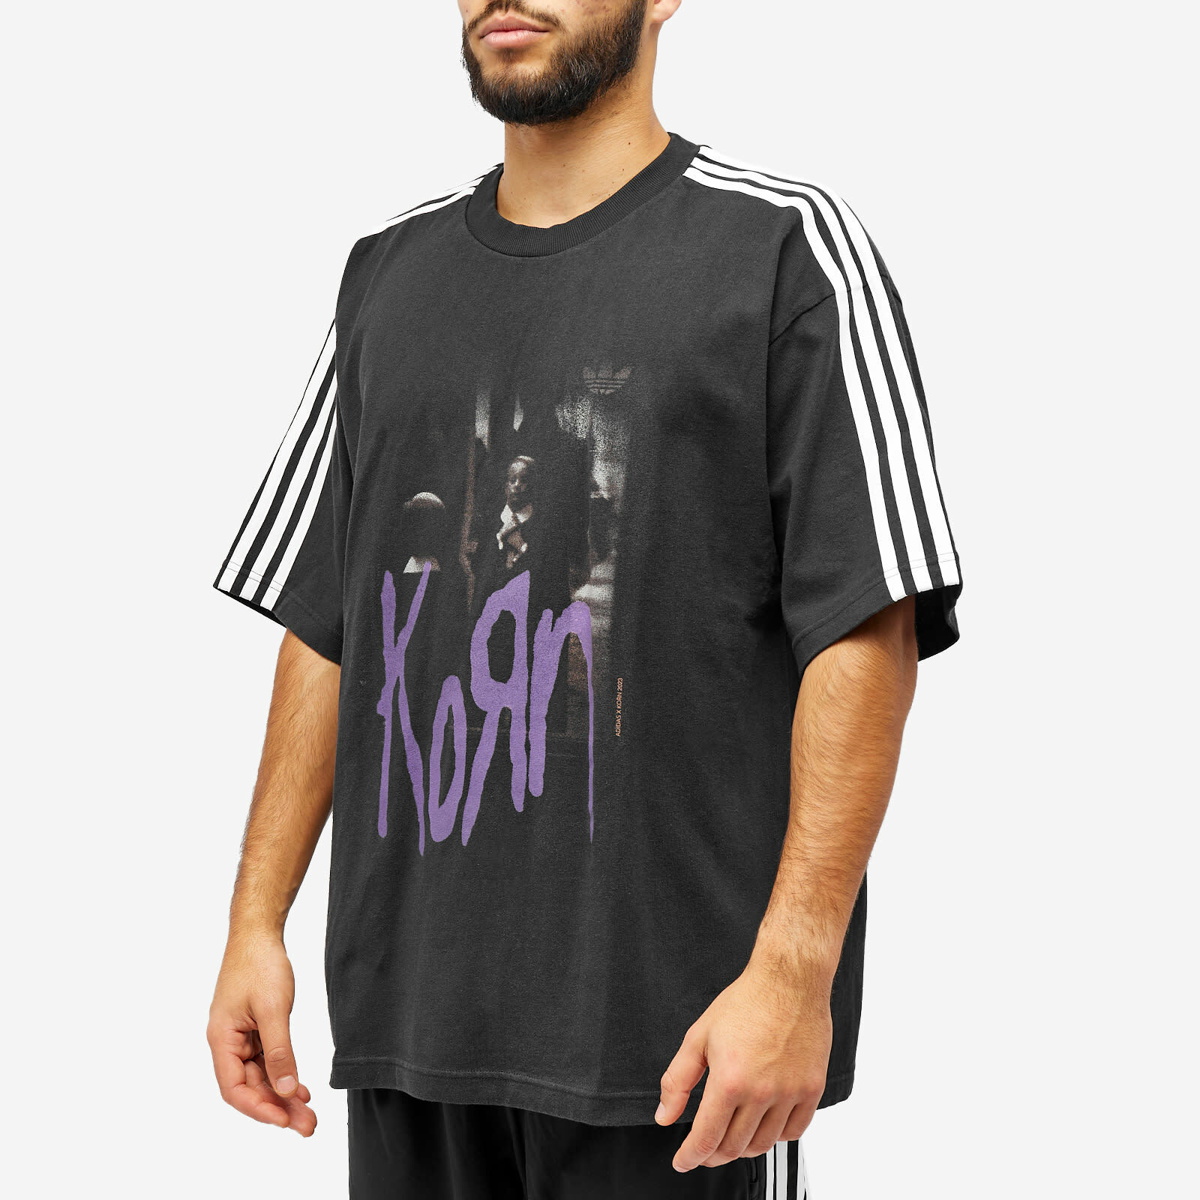 Adidas Men's x KORN Graphic T-Shirt in Carbon